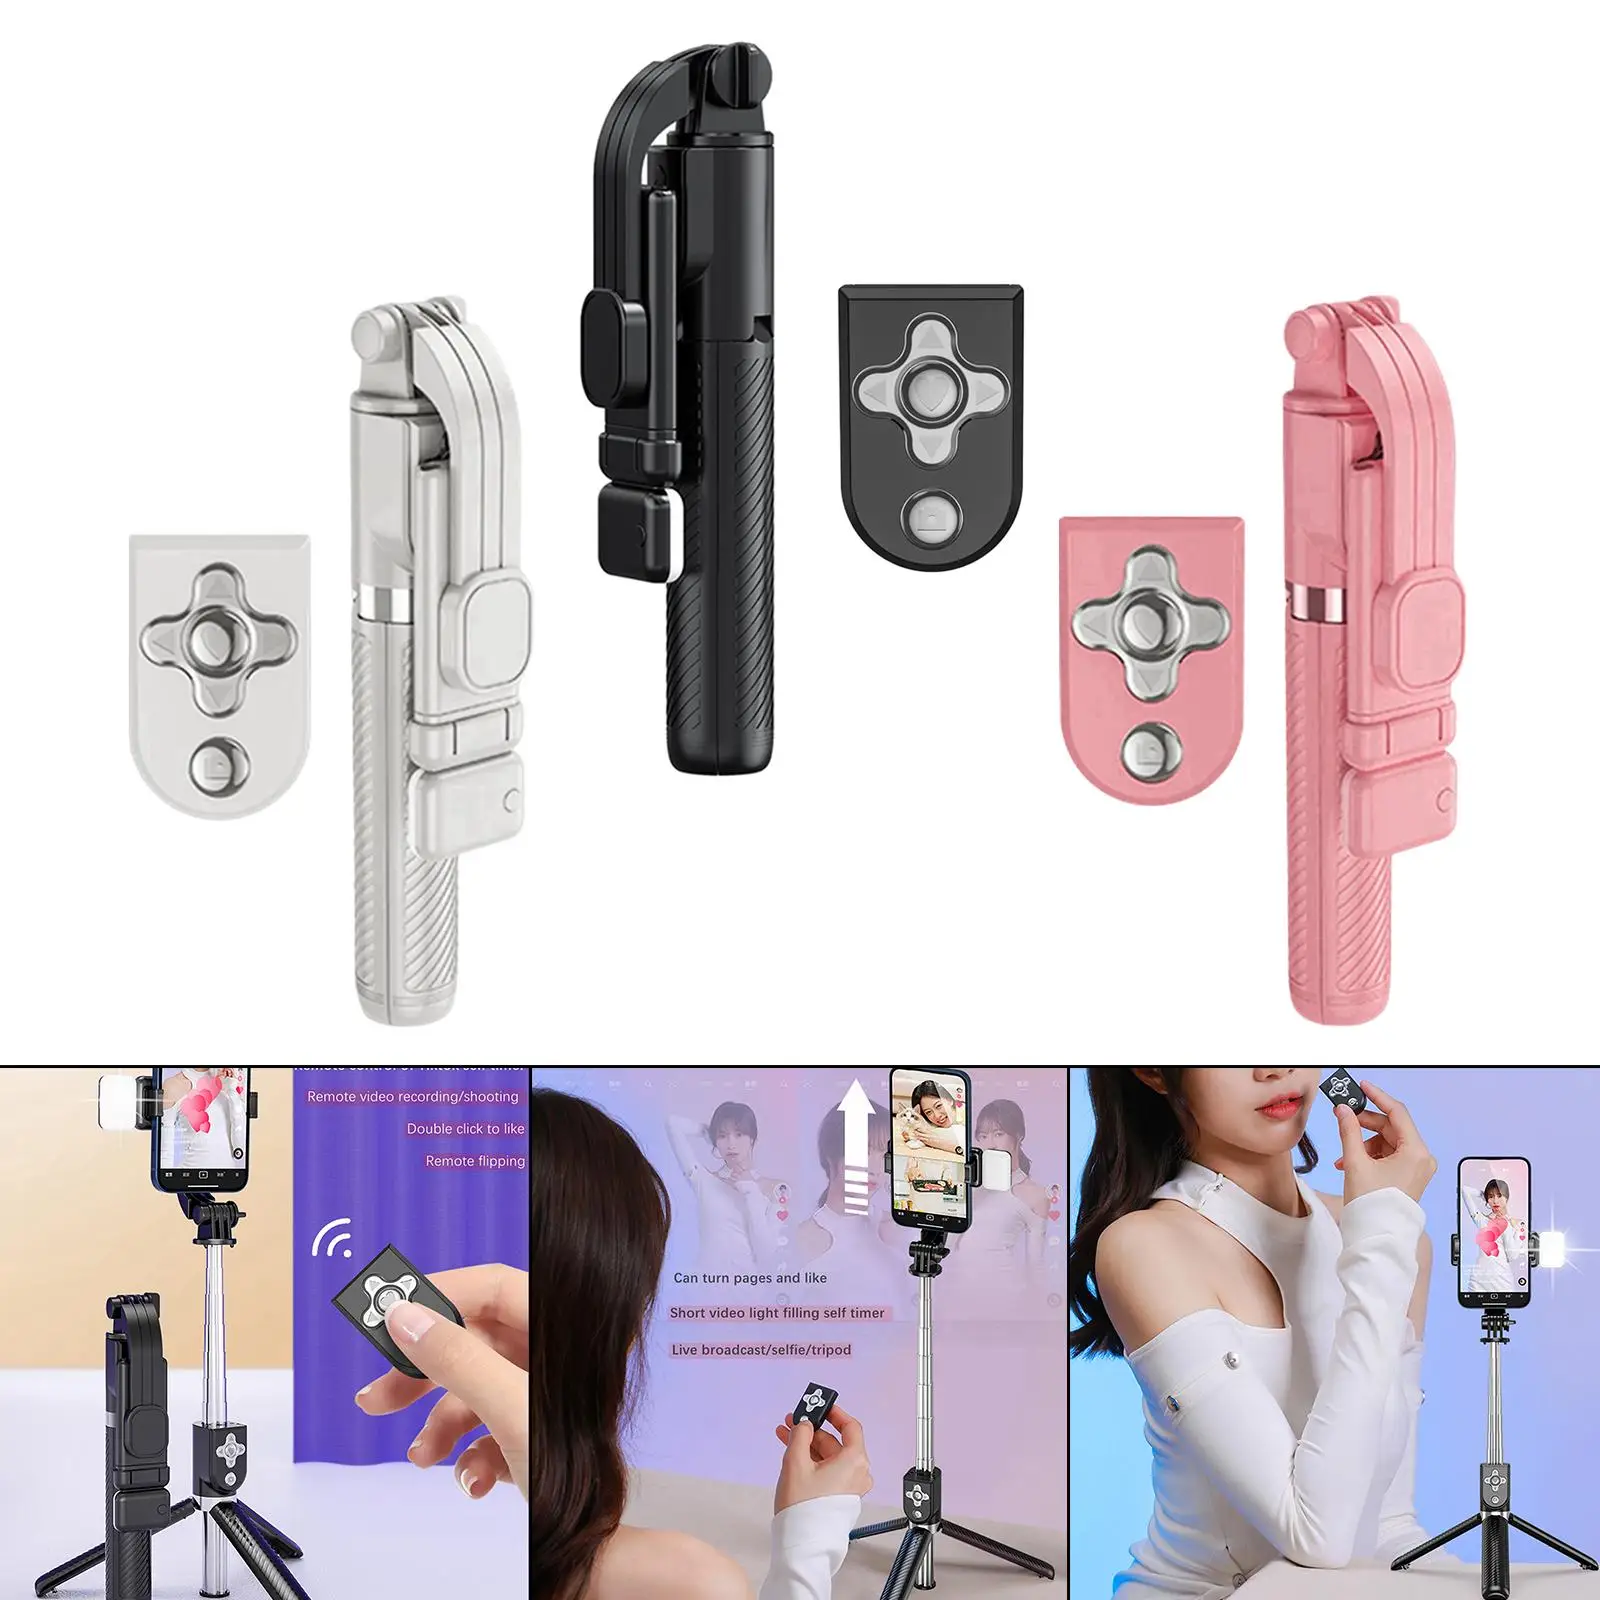 Selfie Stick Tripod Bluetooth Remote Portable All in One Professional Fill Light Stable Extendable for Smartphone Live Streaming